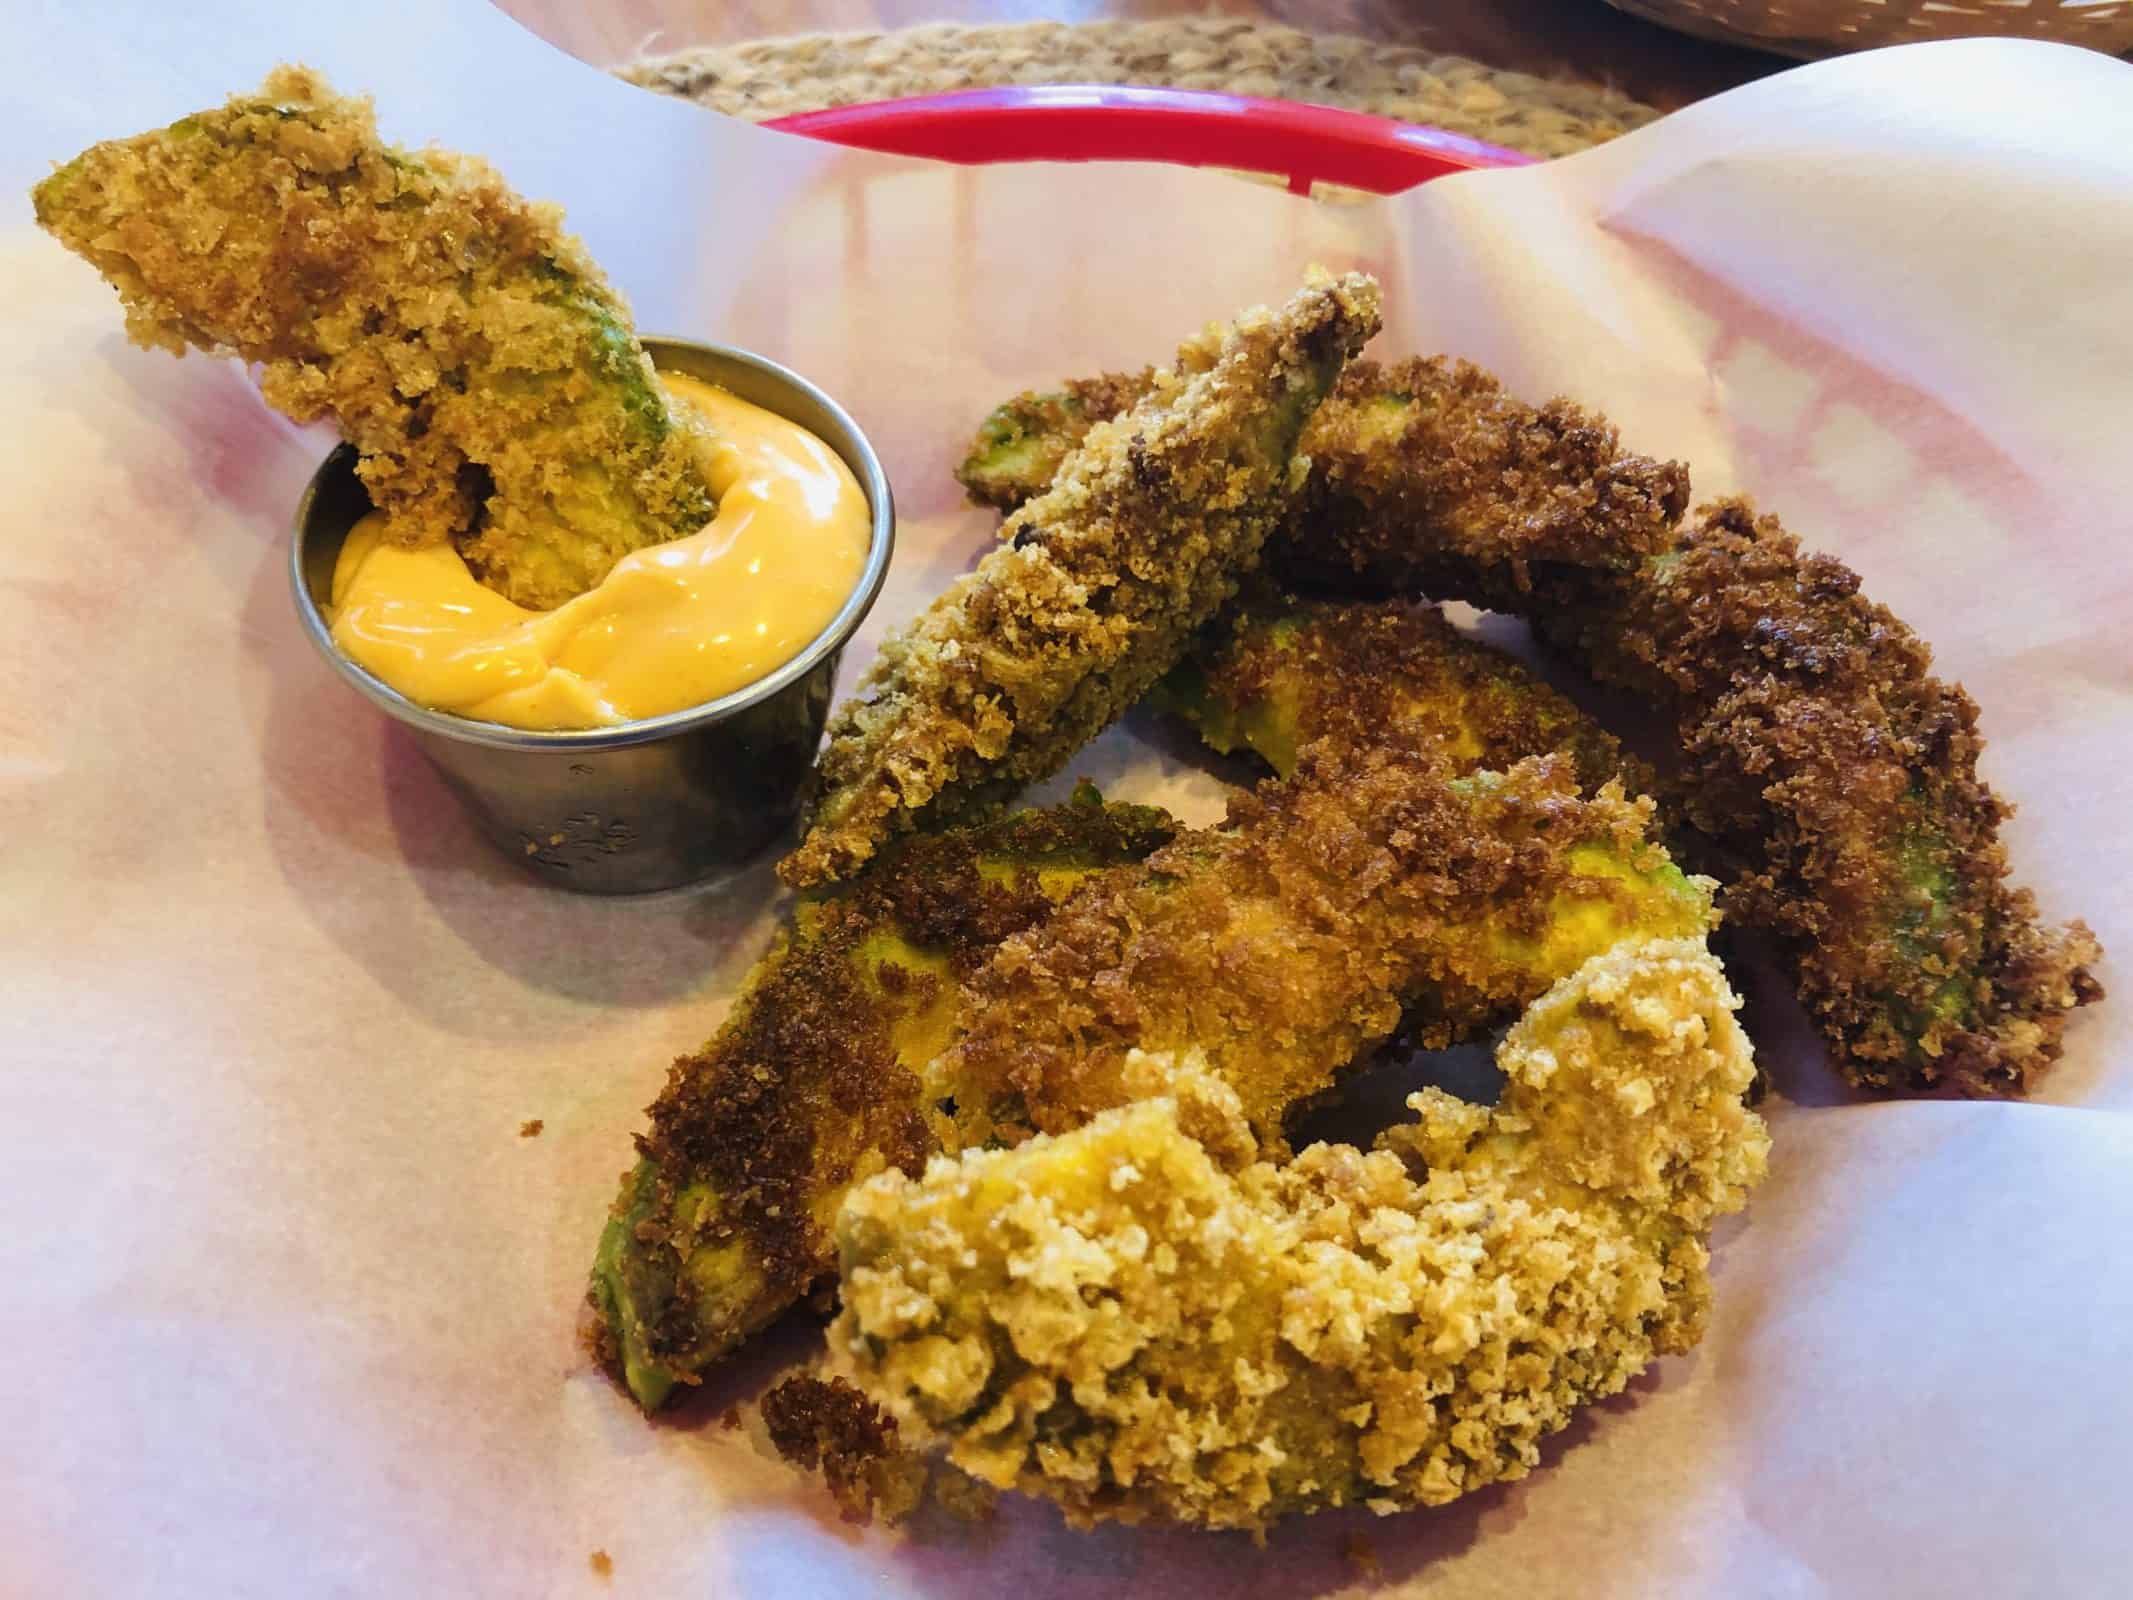 Fresh Baked Avocado Fries in a red basket with parchment paper and a single avocado fry dipped in cheese sauce